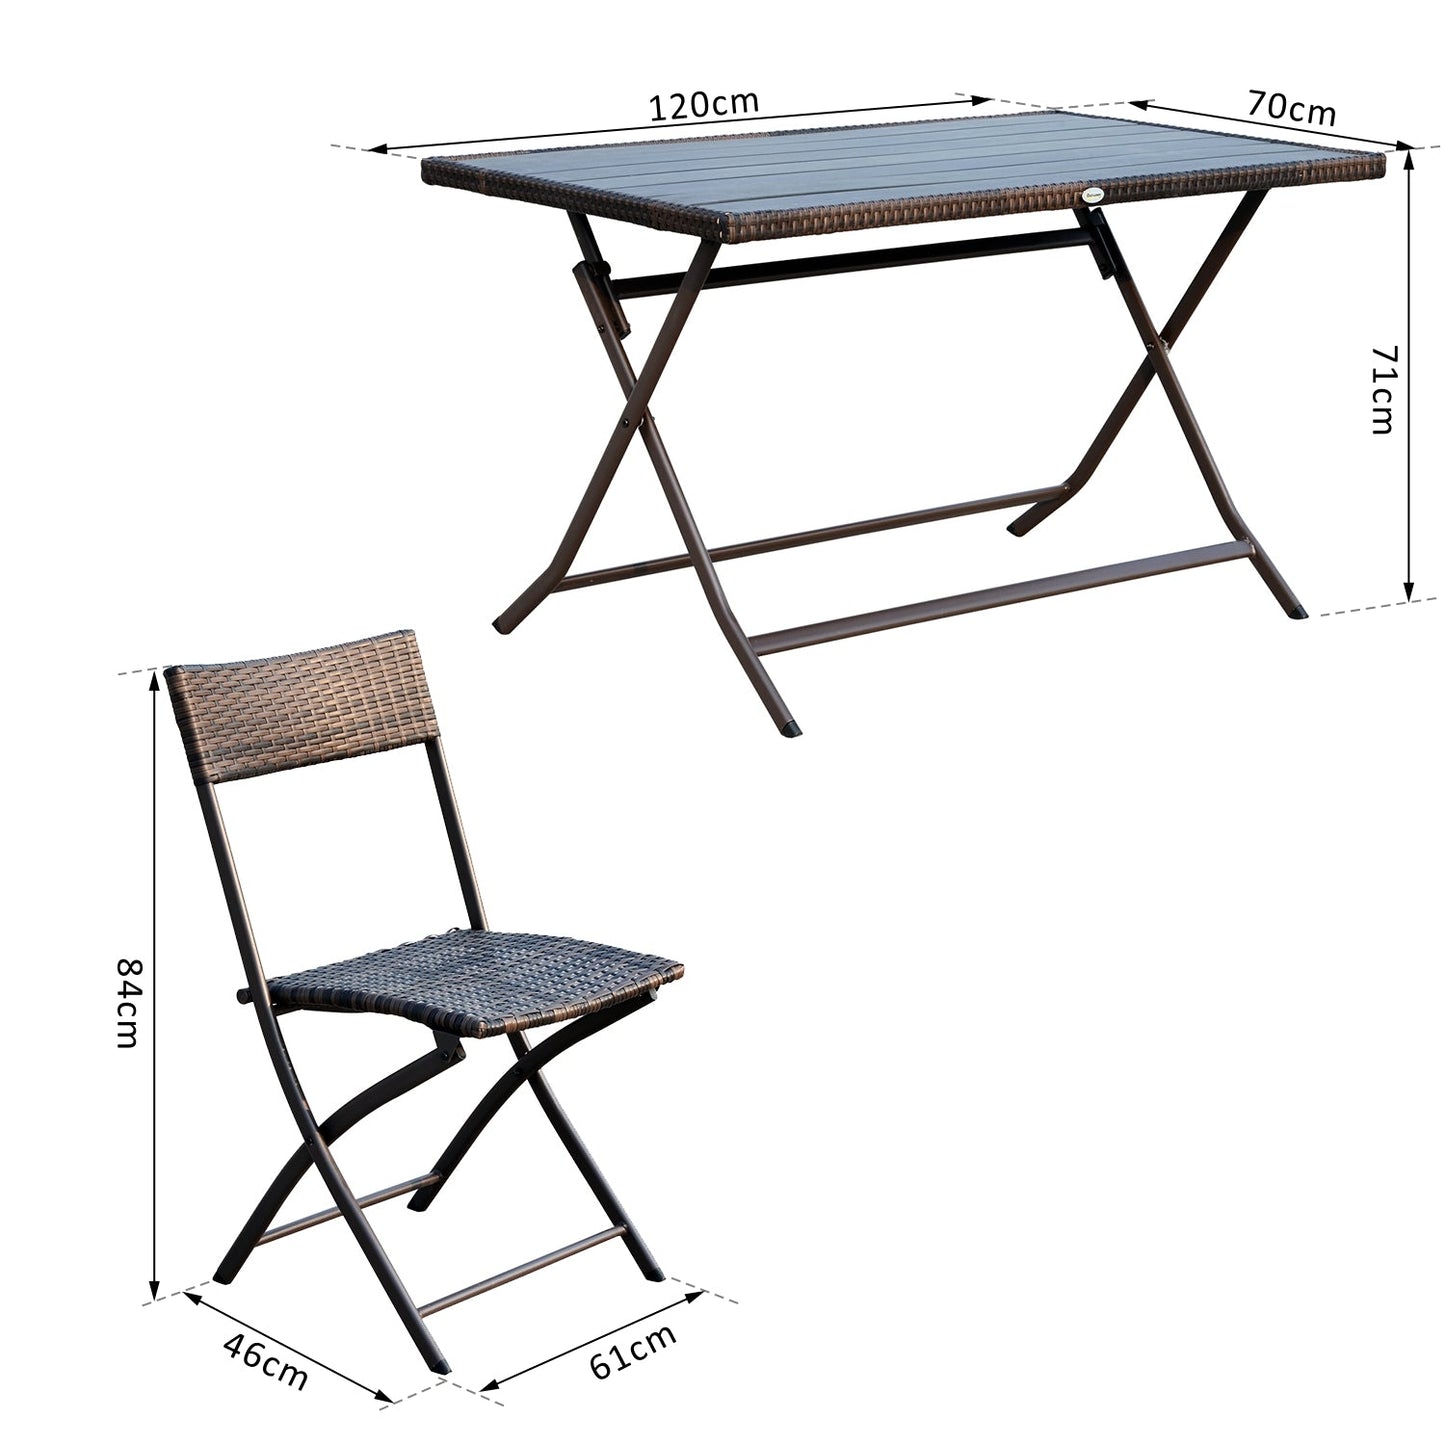 Outdoor Garden Table and Chairs 7pieces | Outsunny